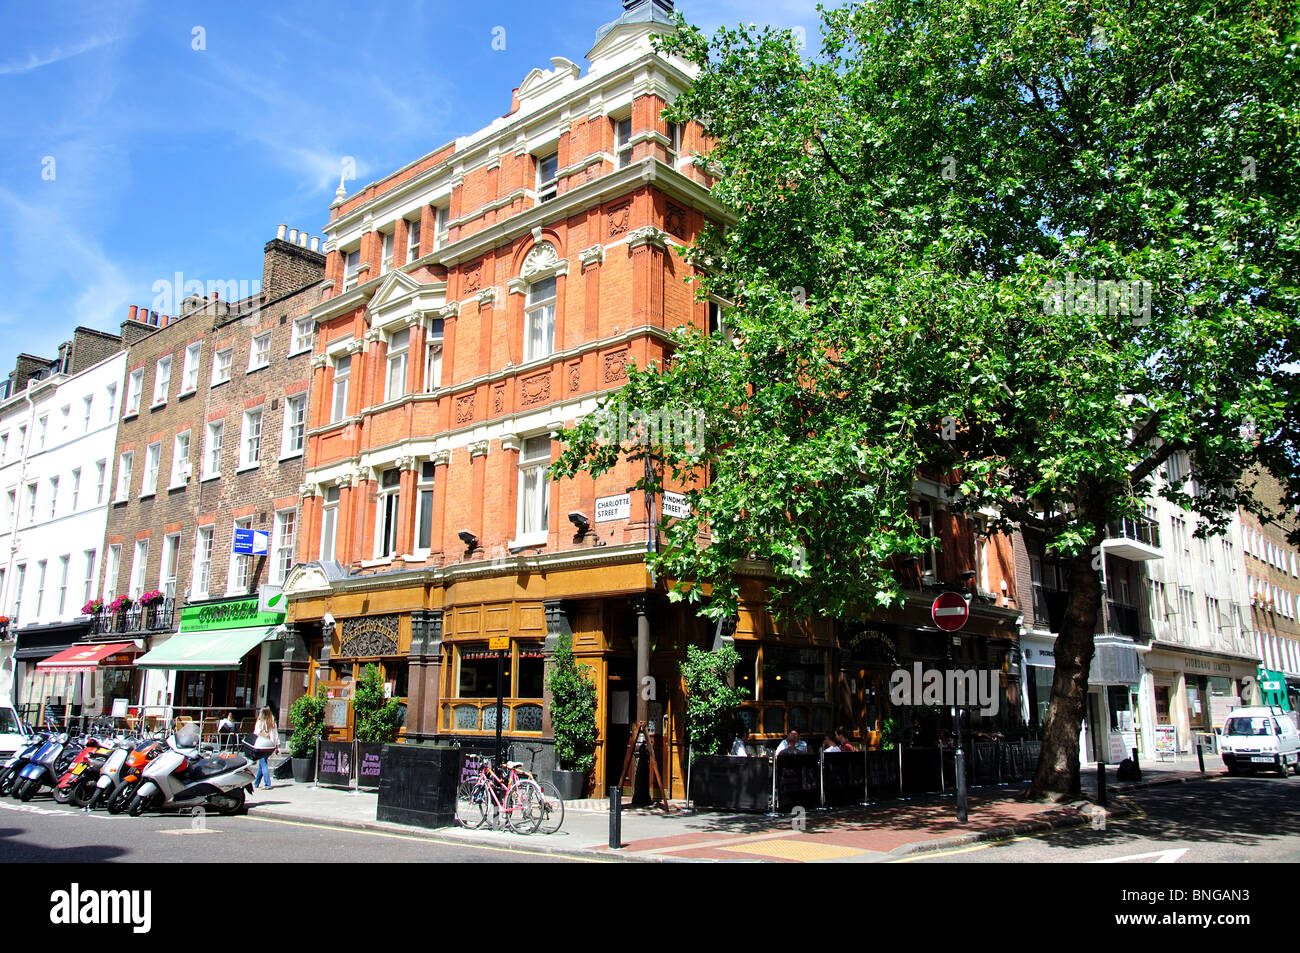 Le Fitzroy Tavern, Charlotte Street, Fitzrovia, City of westminster, Greater London, Angleterre, Royaume-Uni Banque D'Images